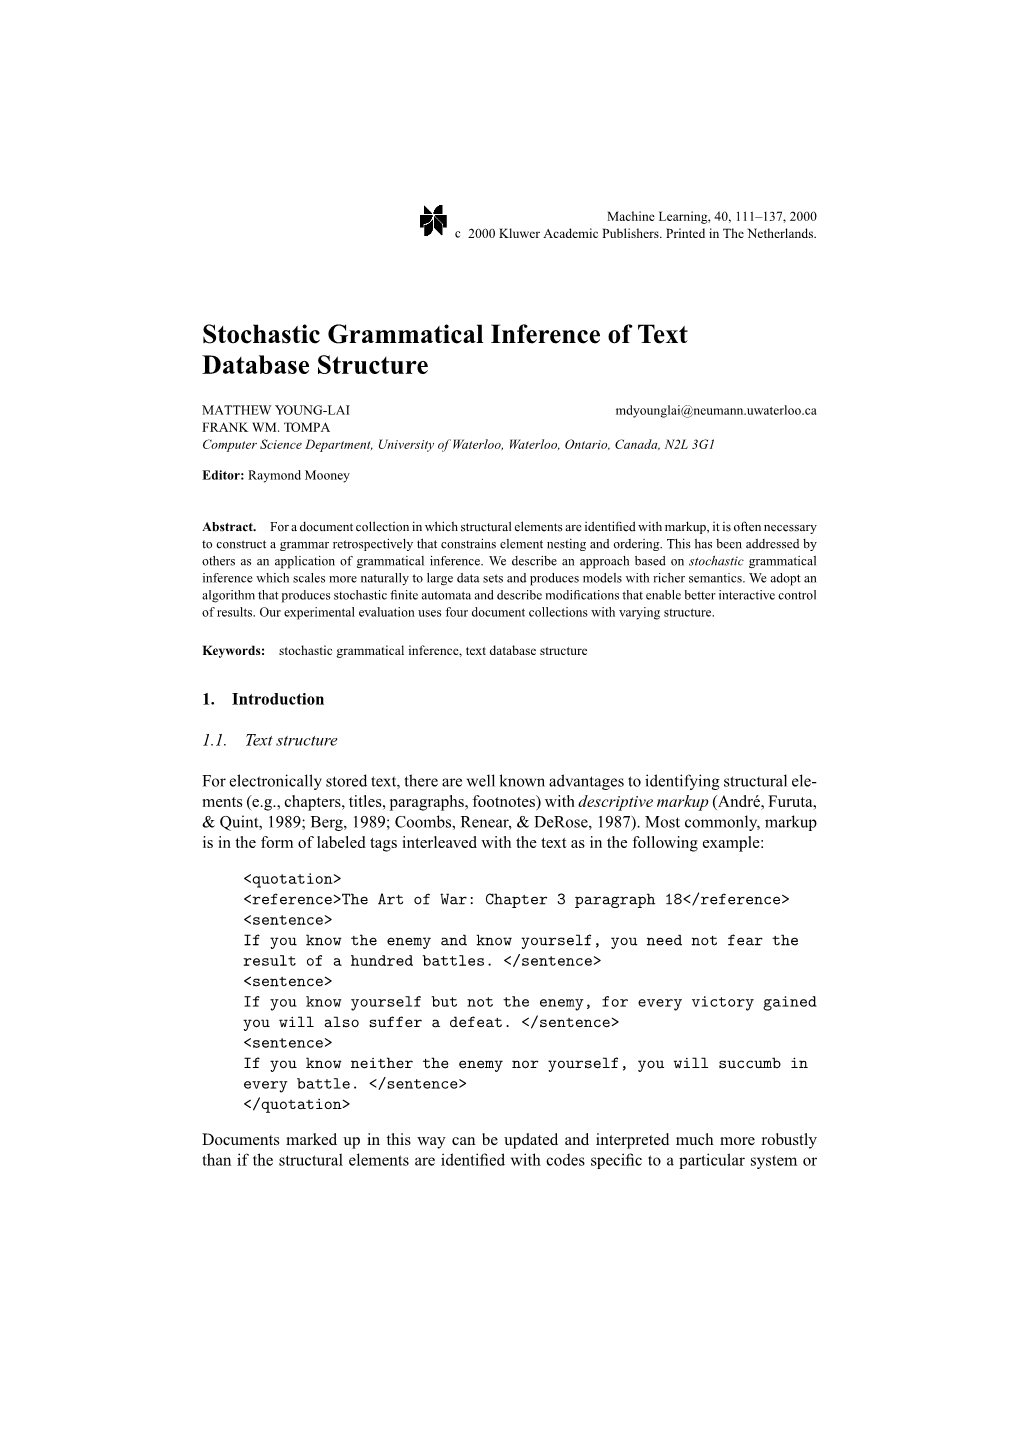 Stochastic Grammatical Inference of Text Database Structure